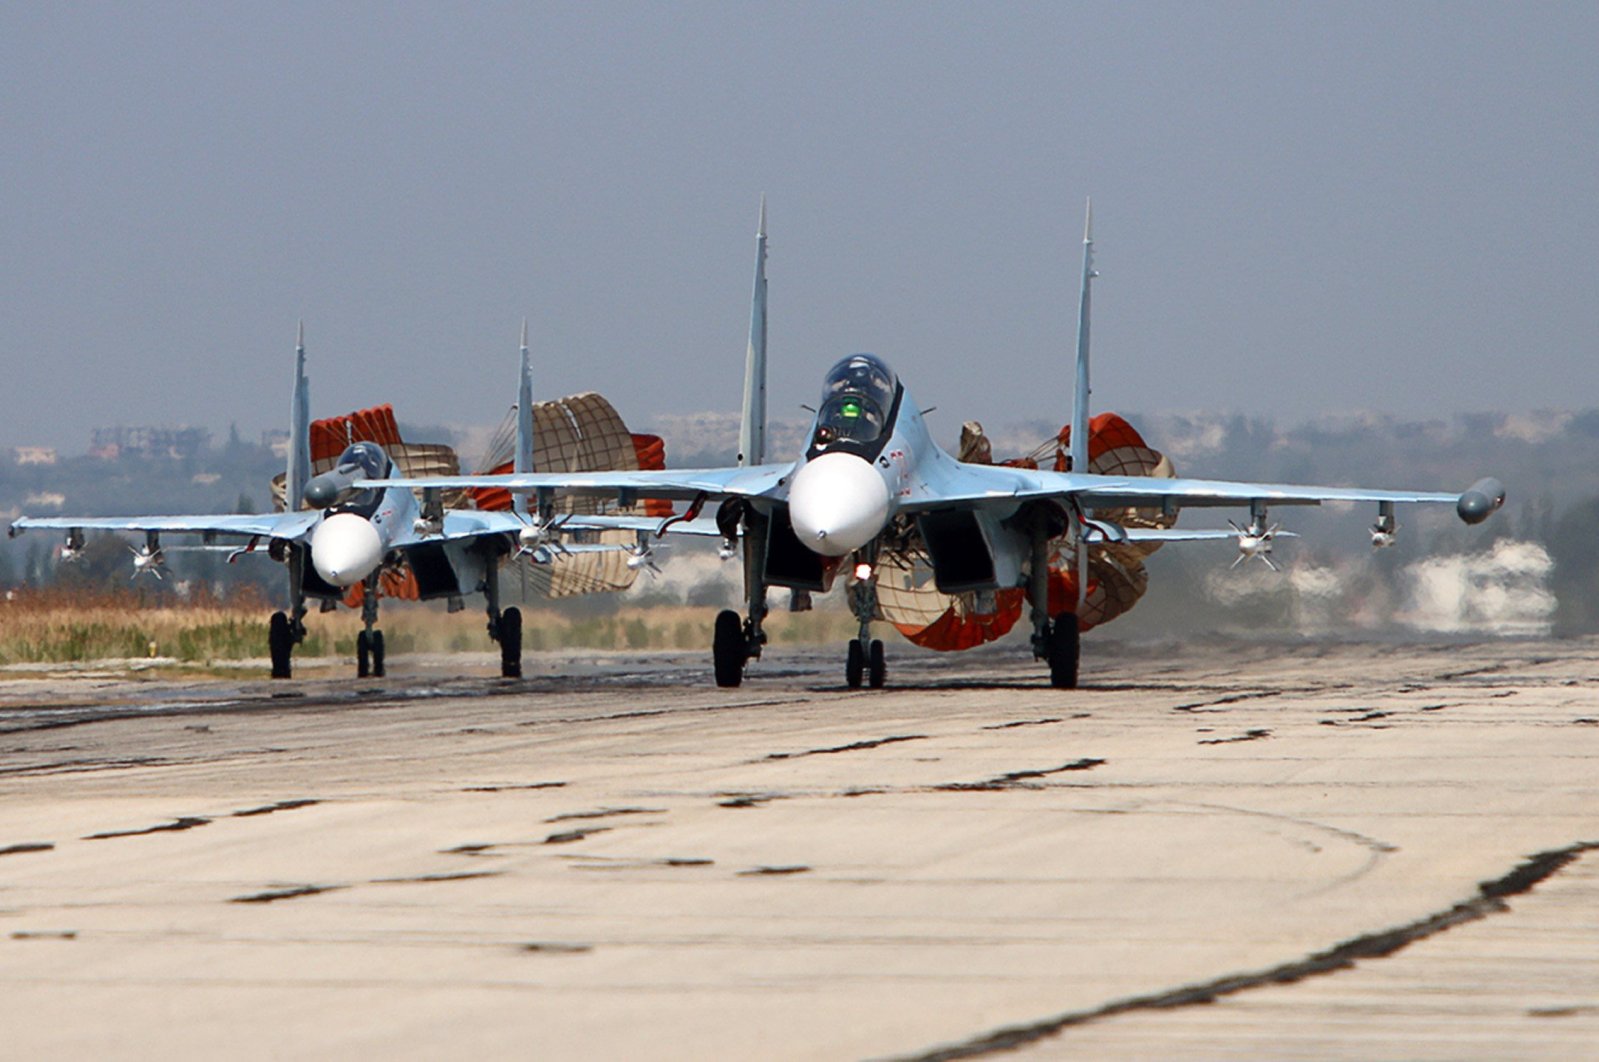 A picture taken on October 3, 2015 shows Russian Sukhoi SU-30 SM jet fighters landing on a runway at the Hmeimim airbase in the Syrian province of Latakia. (AFP Photo)